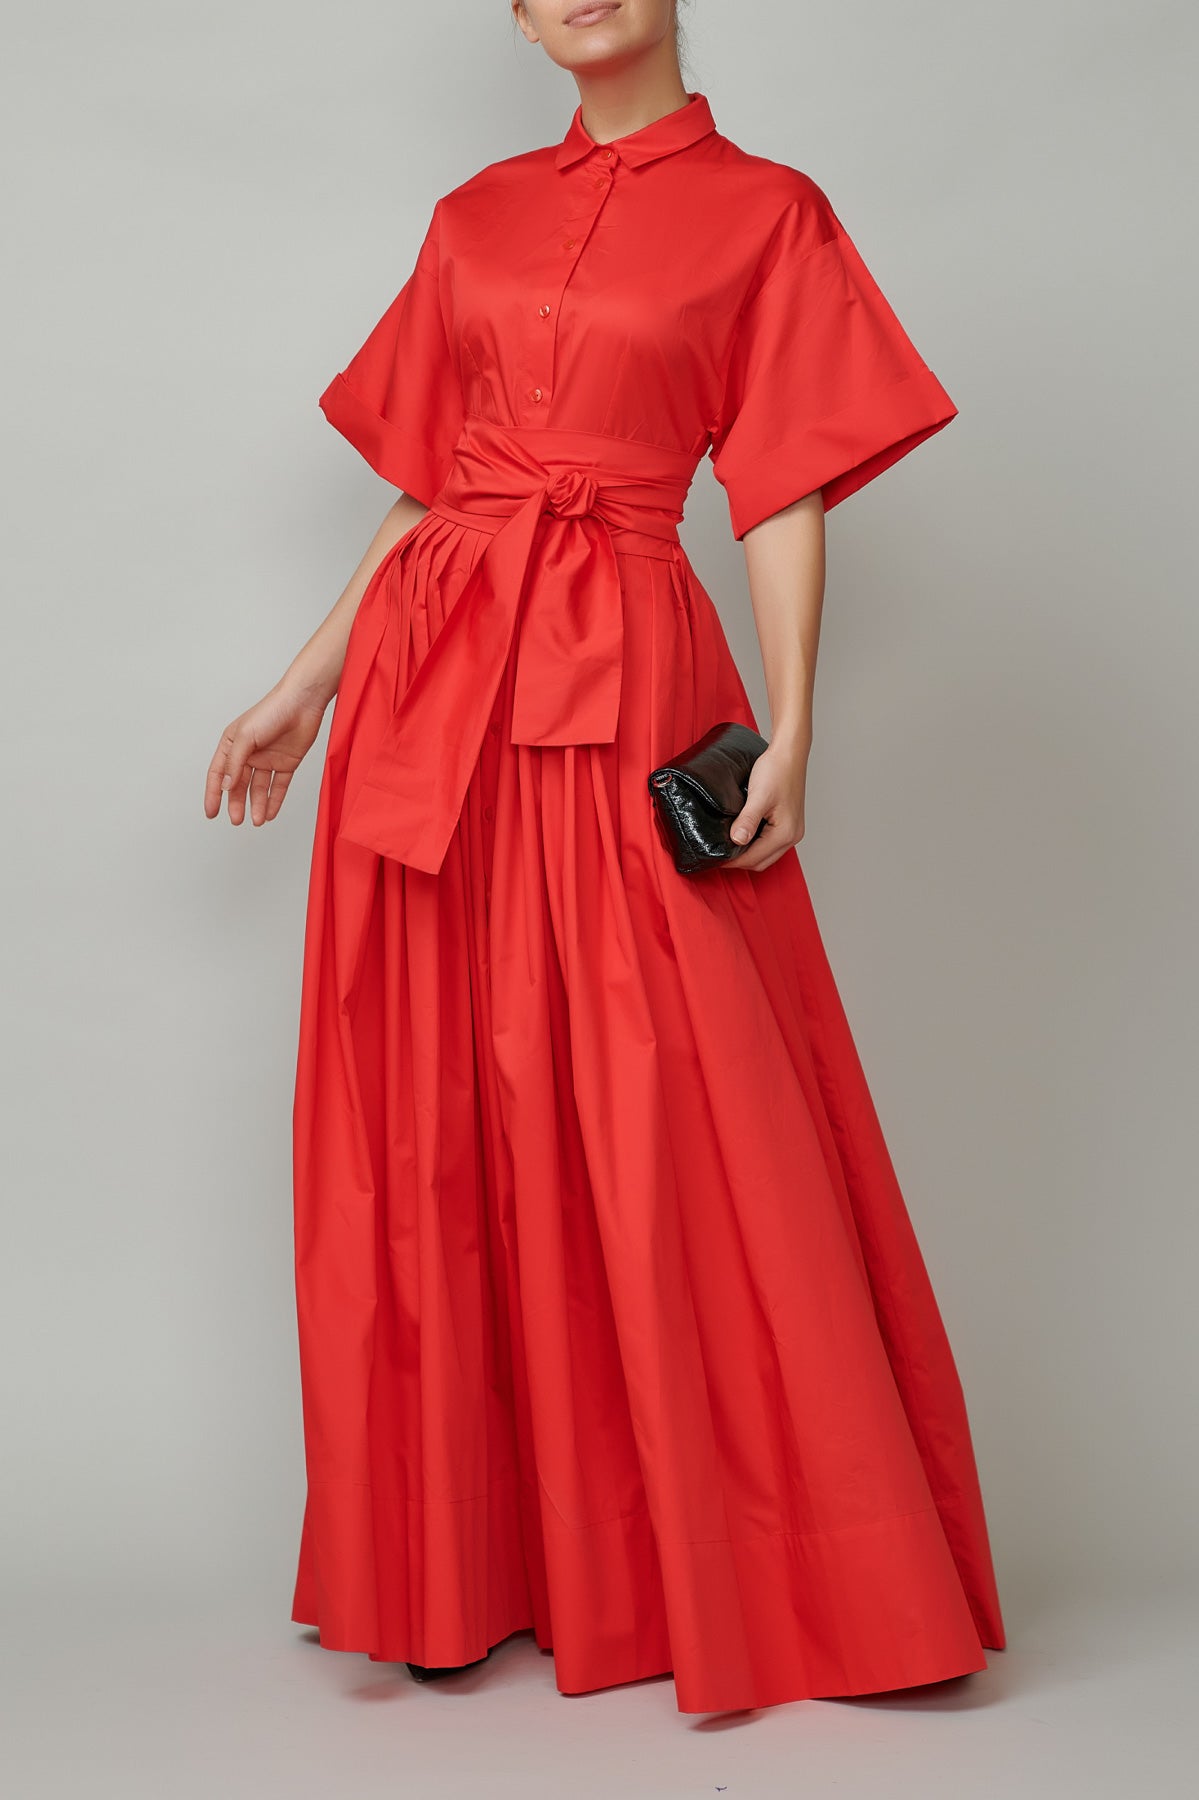 Evening dress, long, made of red cotton